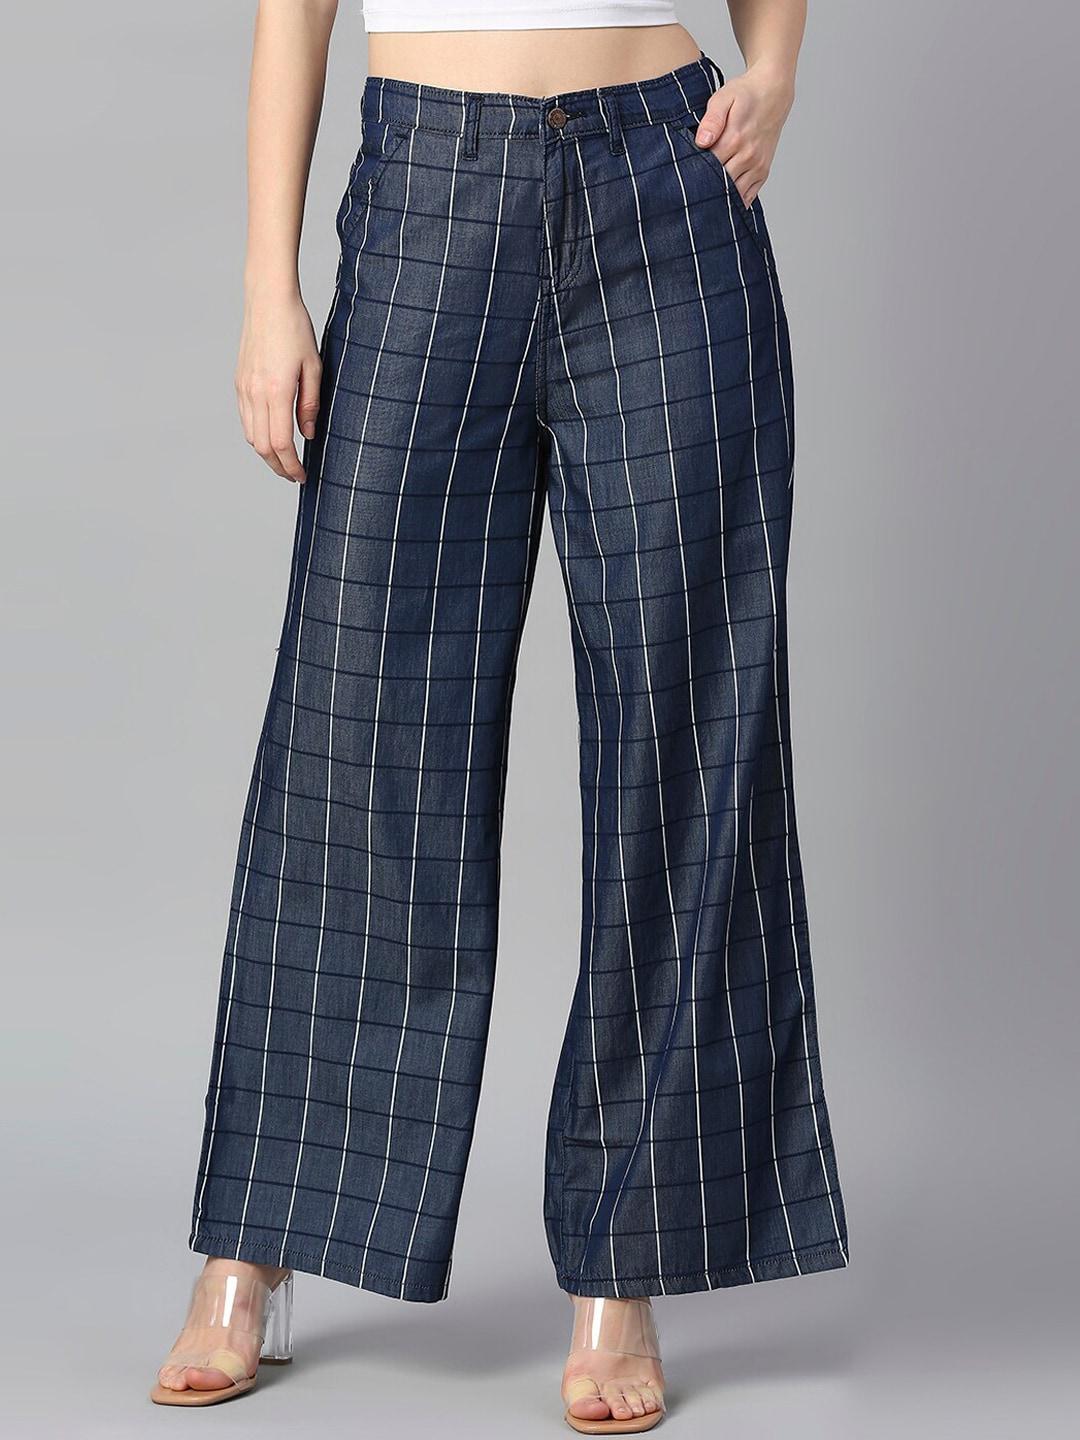 high-star-women-striped-flared-high-rise-trousers